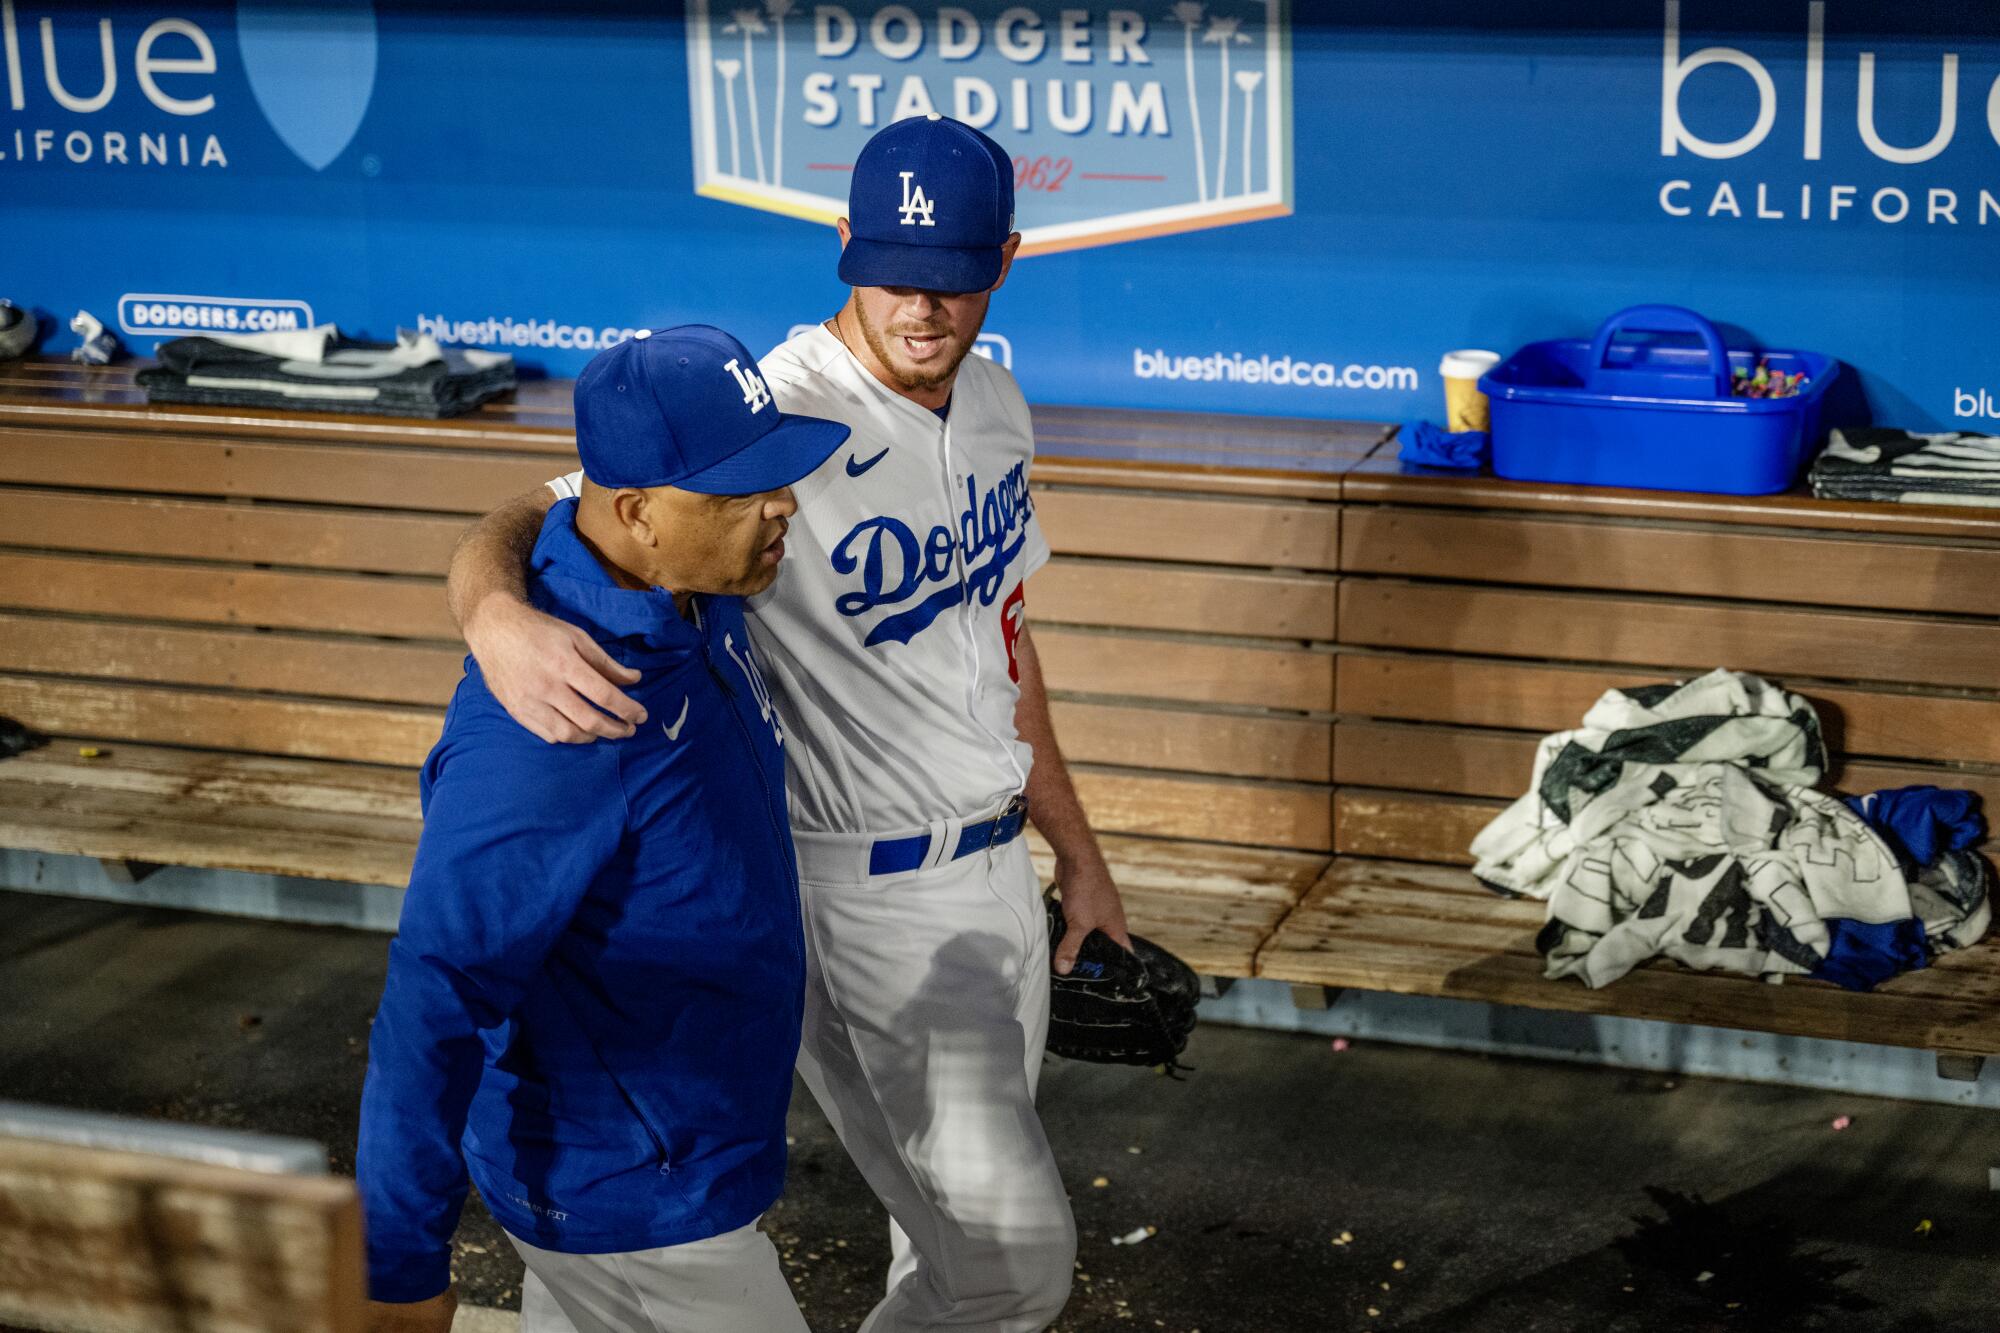 Dodgers relief pitcher Caleb Ferguson wraps his arm around Dodger manager Dave Roberts after a win.